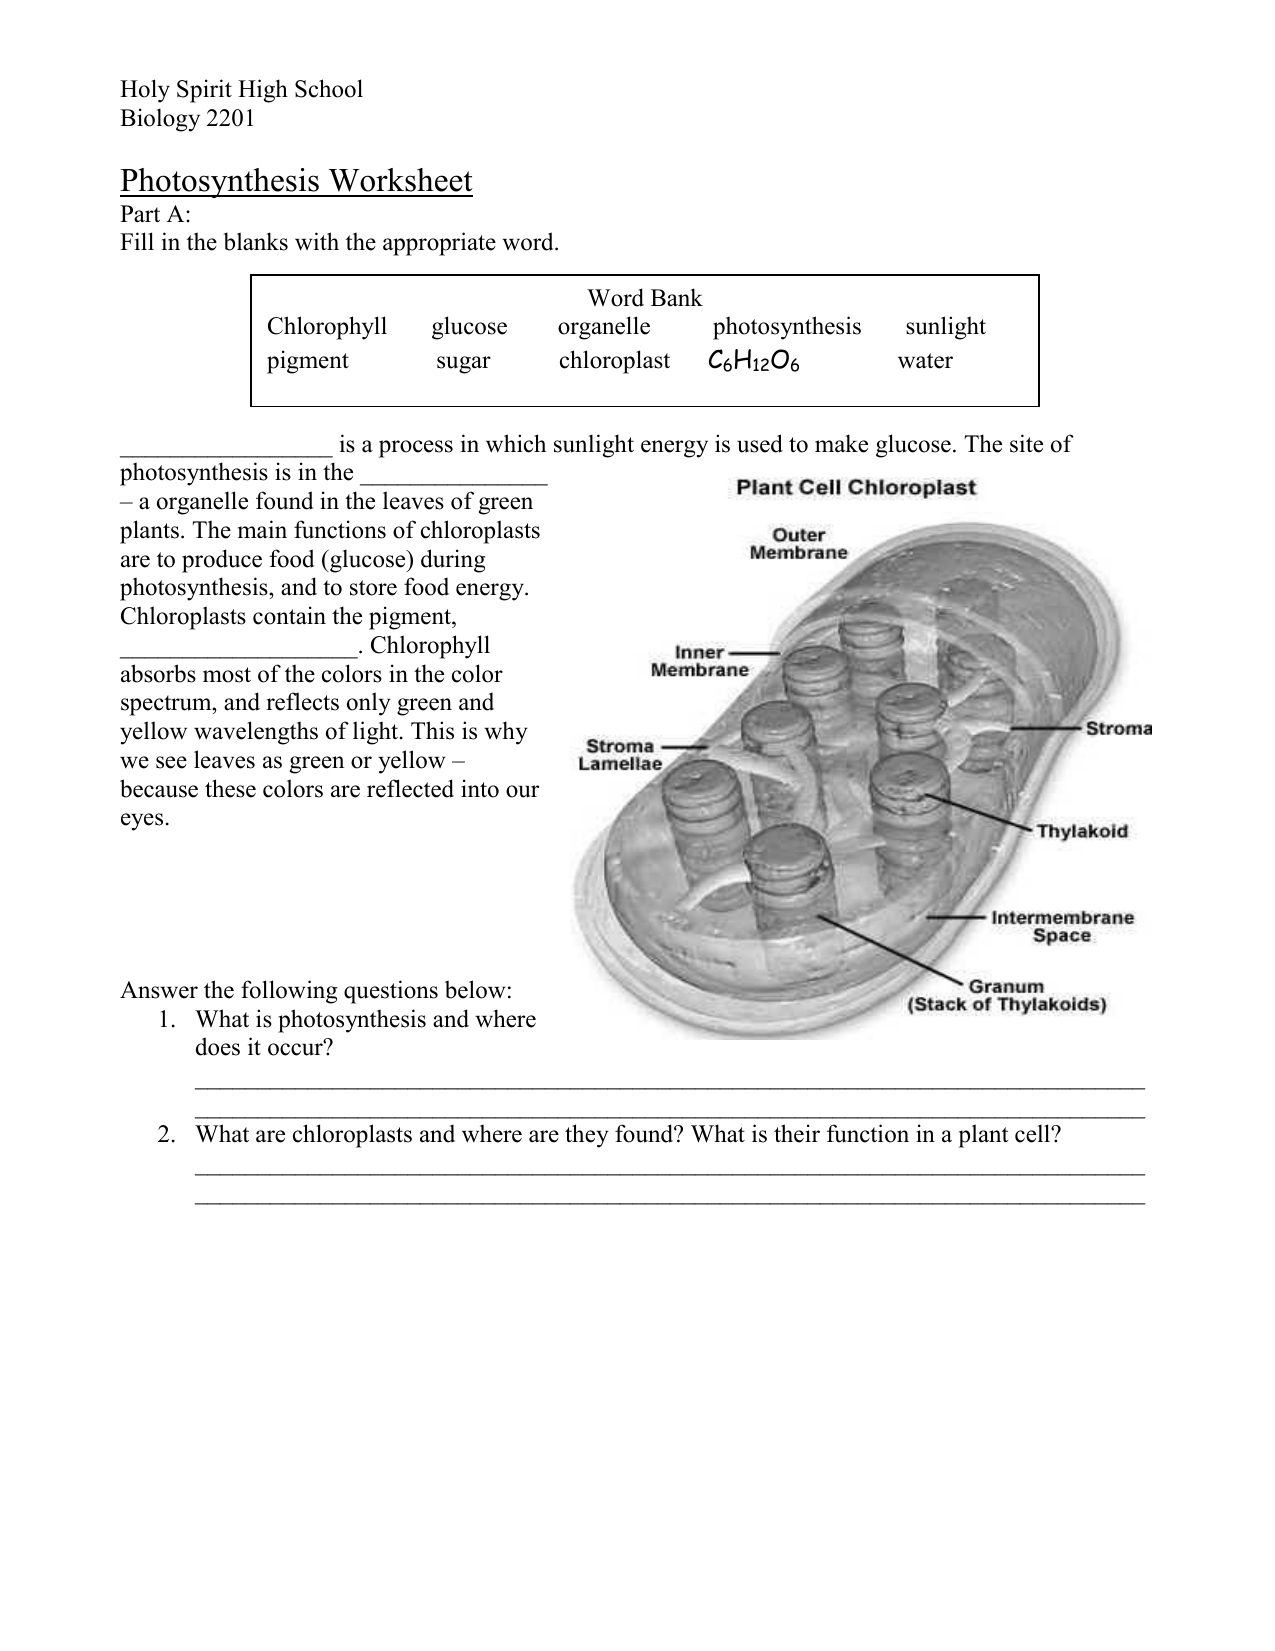 Photosynthesis Diagrams Worksheet Answers